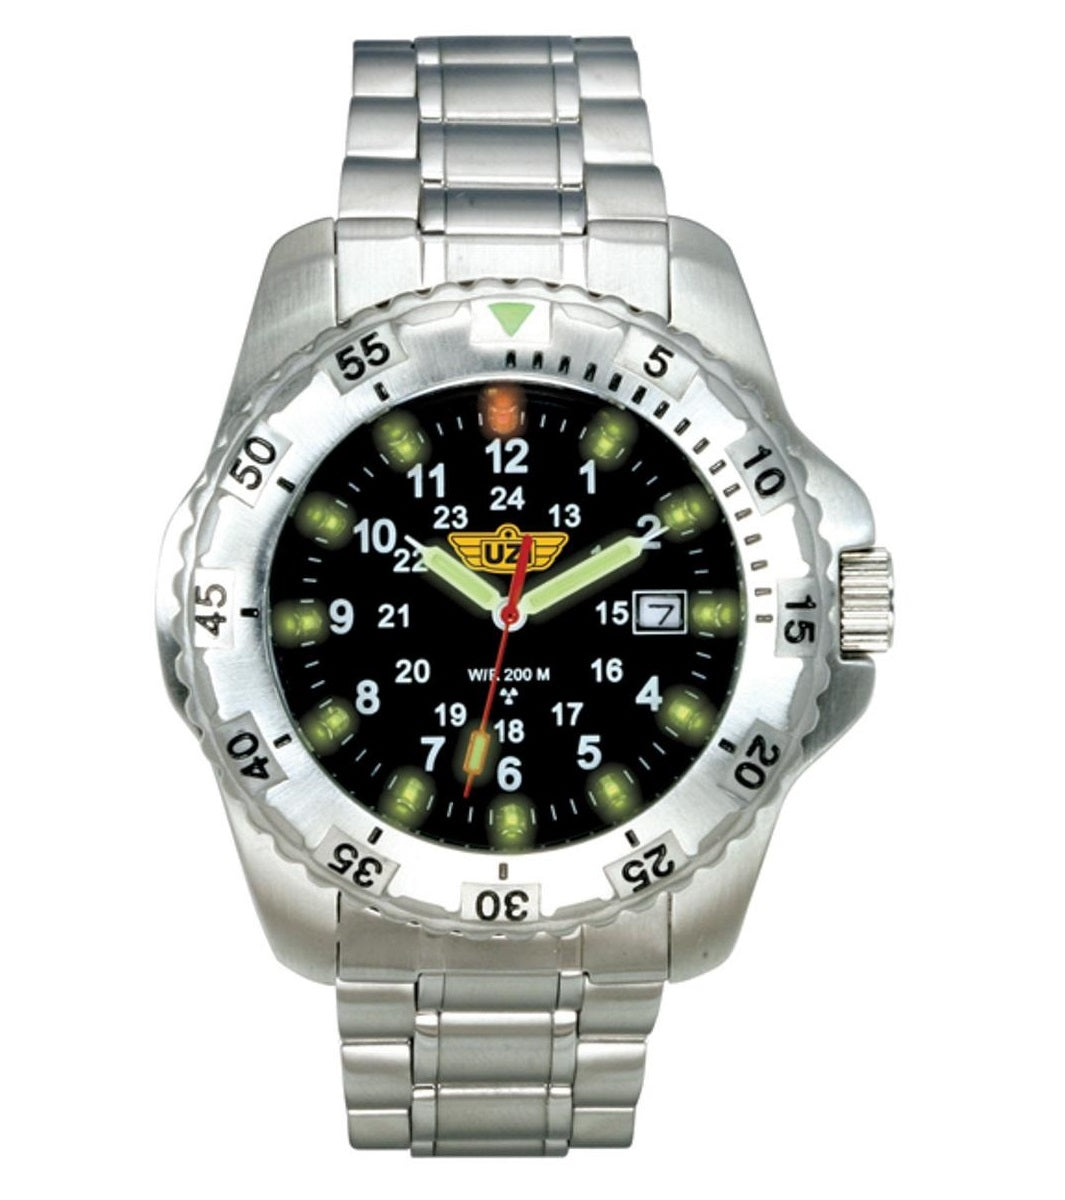 UZI-032-SS - The Defender Tritium H3 Silver Stainless Strap Watch